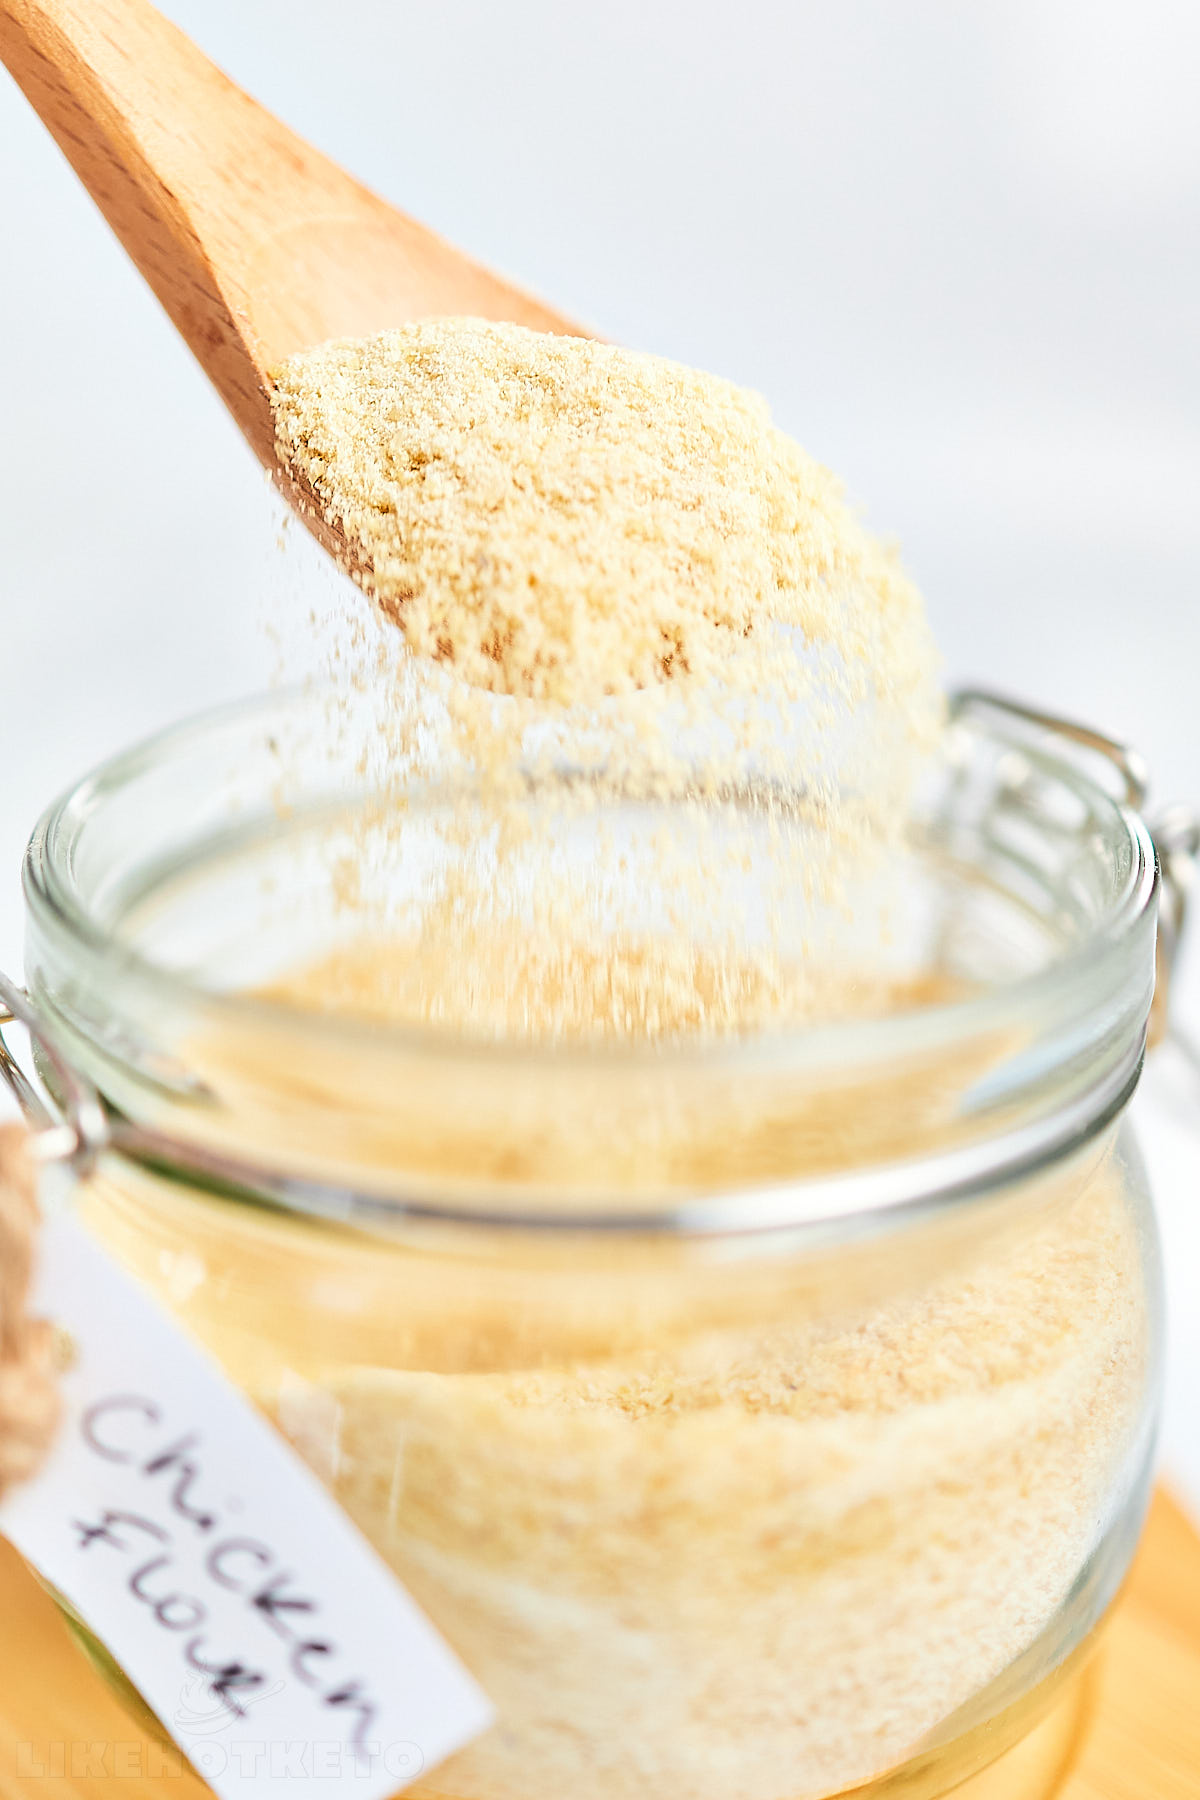 Fine granules of dehydrated chicken powder falling from a spoon into a jar.